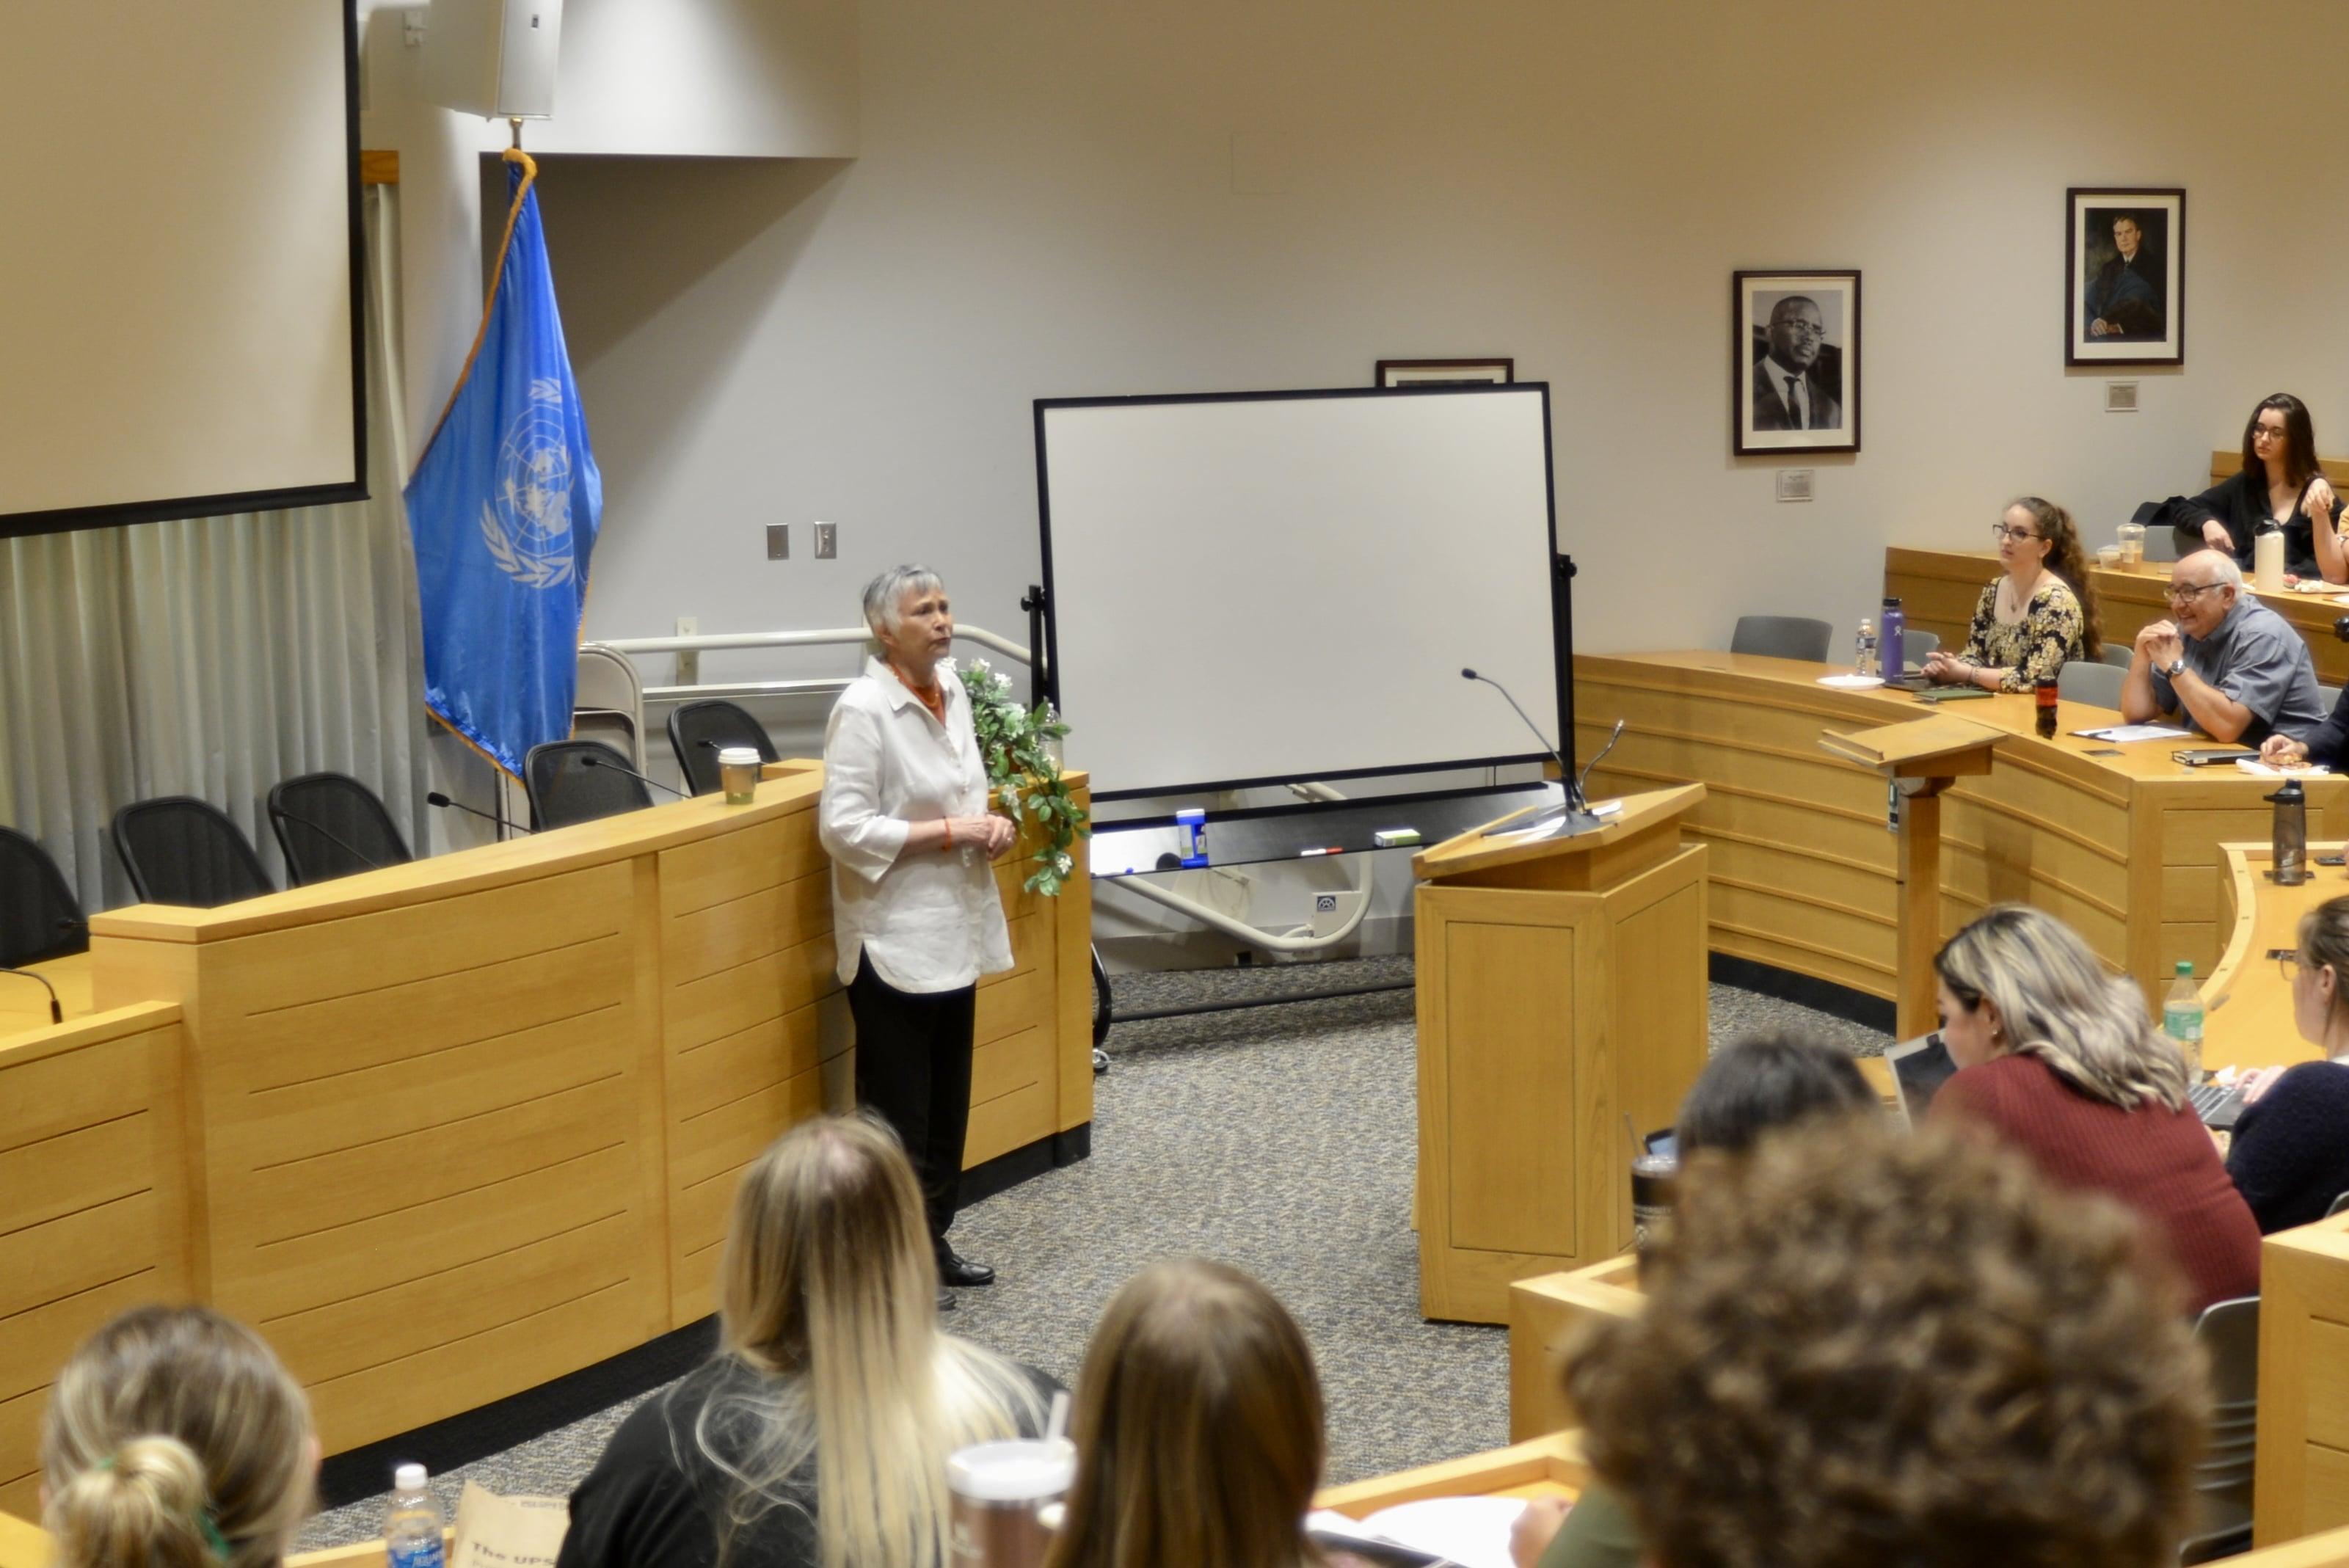 Brenda Hollis speaking to gathered students, faculty and staff in CWRU Moot Courtroom